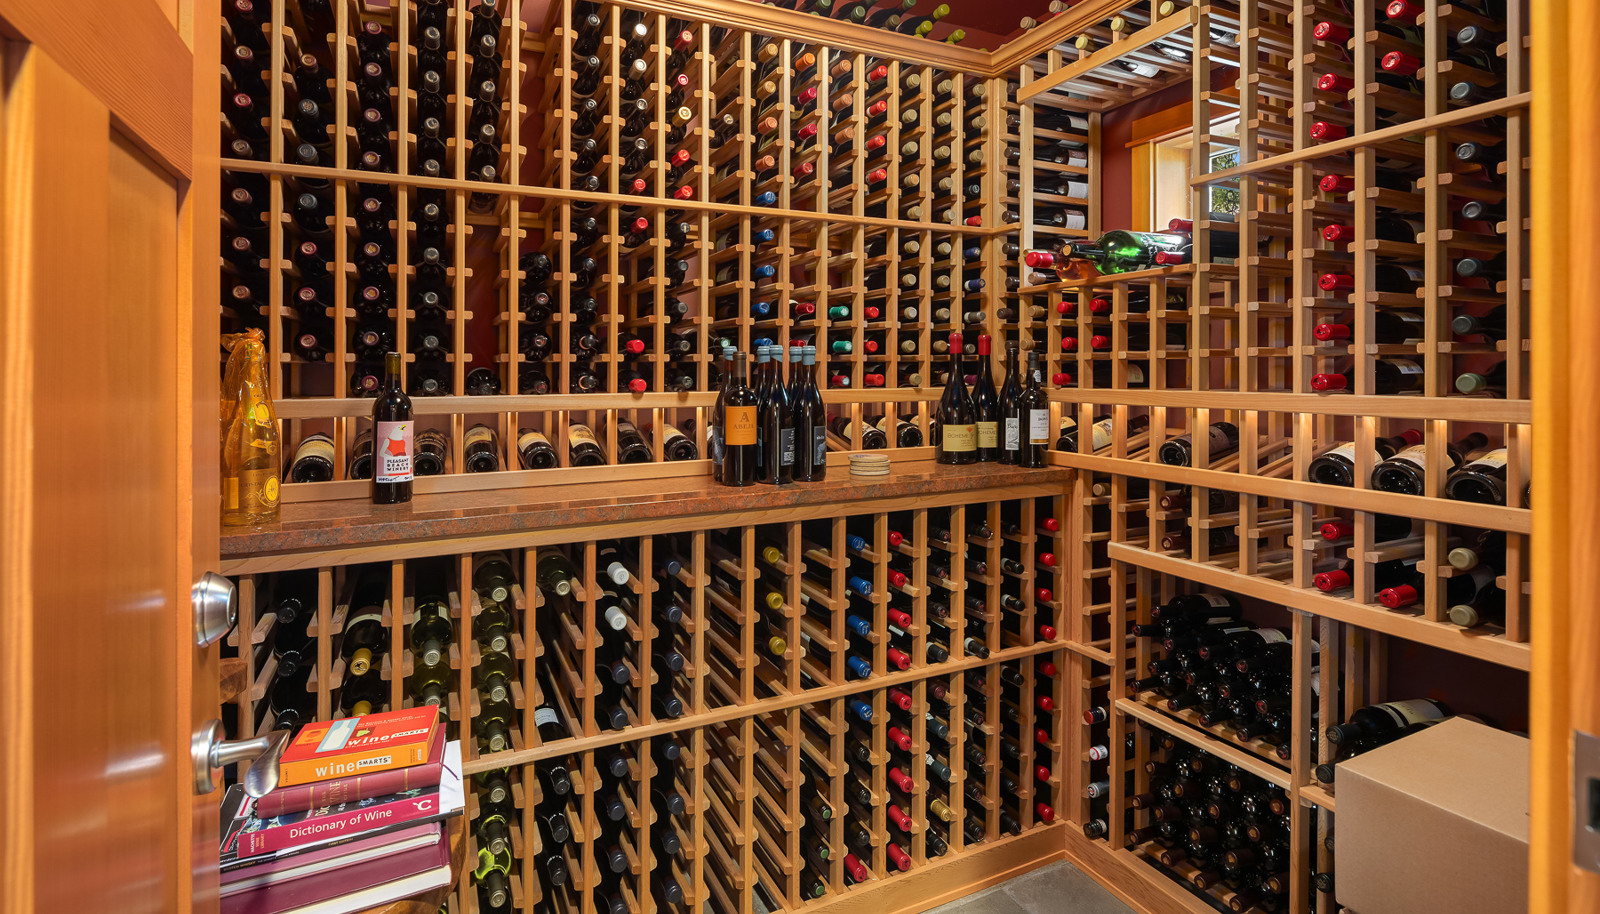  The sommelier will revel in a locking wine room.